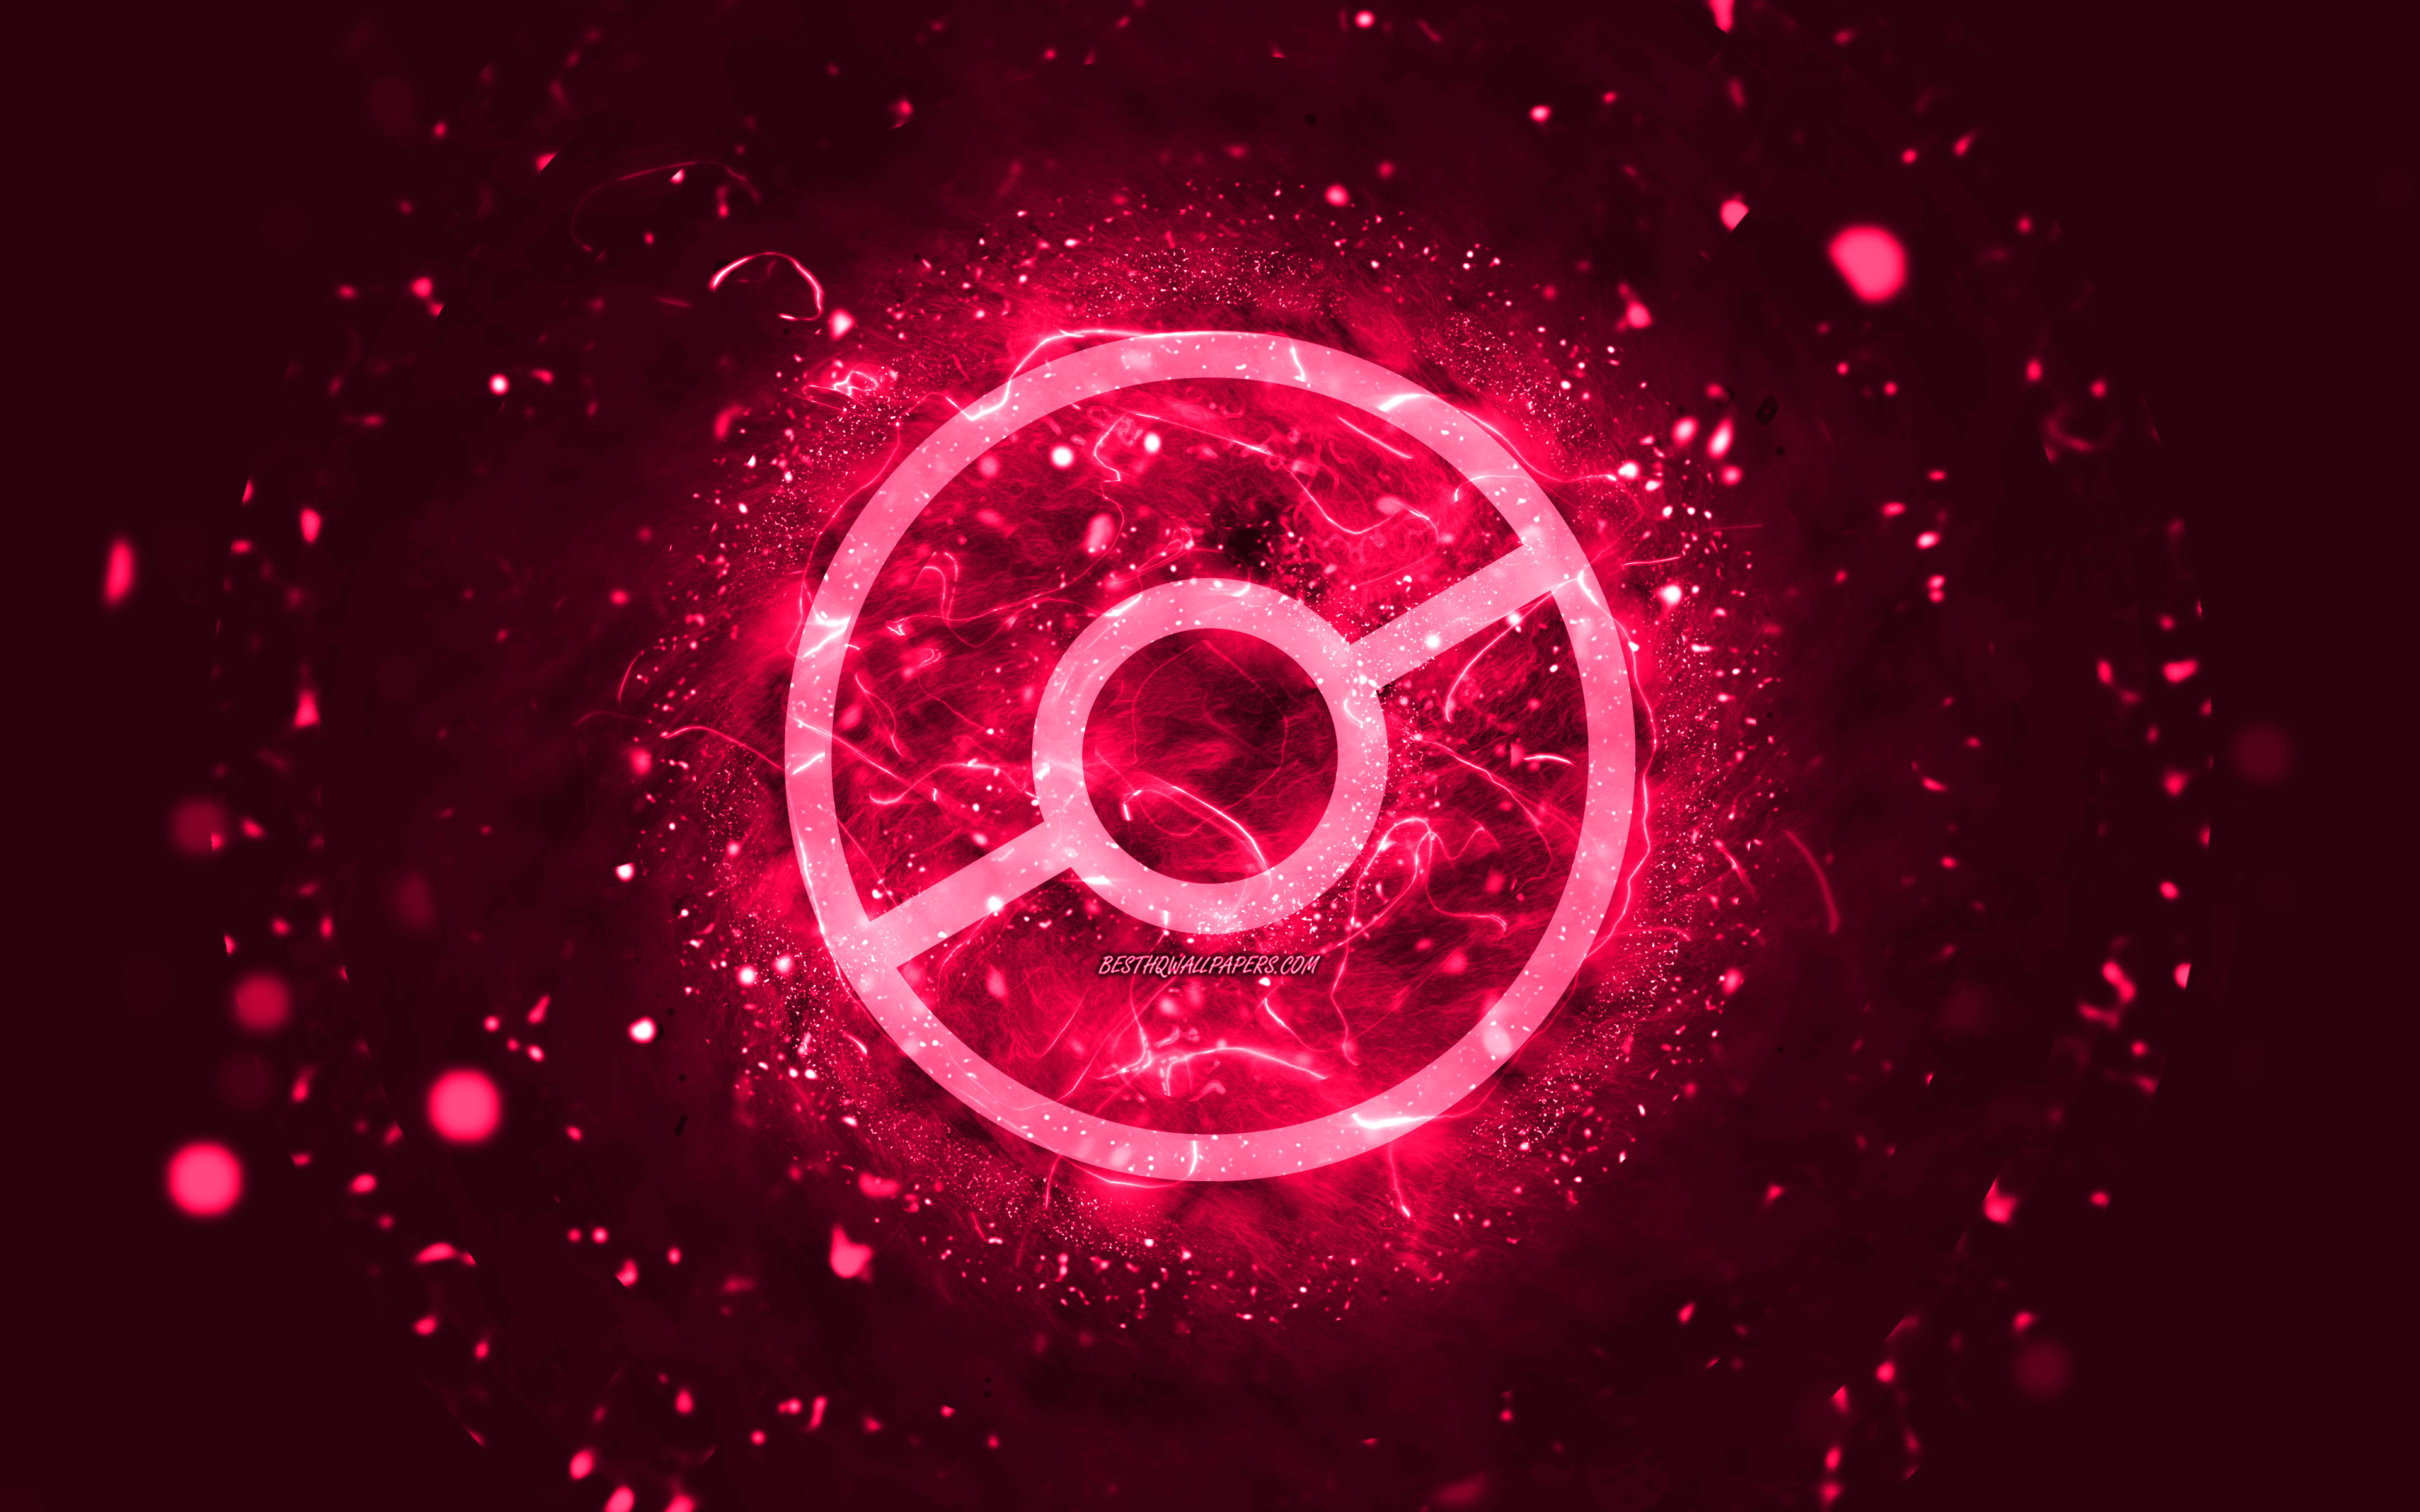 Download Wallpapers Pokemon Go Pink Logo 4k Pink Neon Lights Creative Pink Abstract Background Pokemon Go Logo Online Games Pokemon Go For Desktop With Resolution 3840x2400 High Quality Hd Pictures Wallpapers